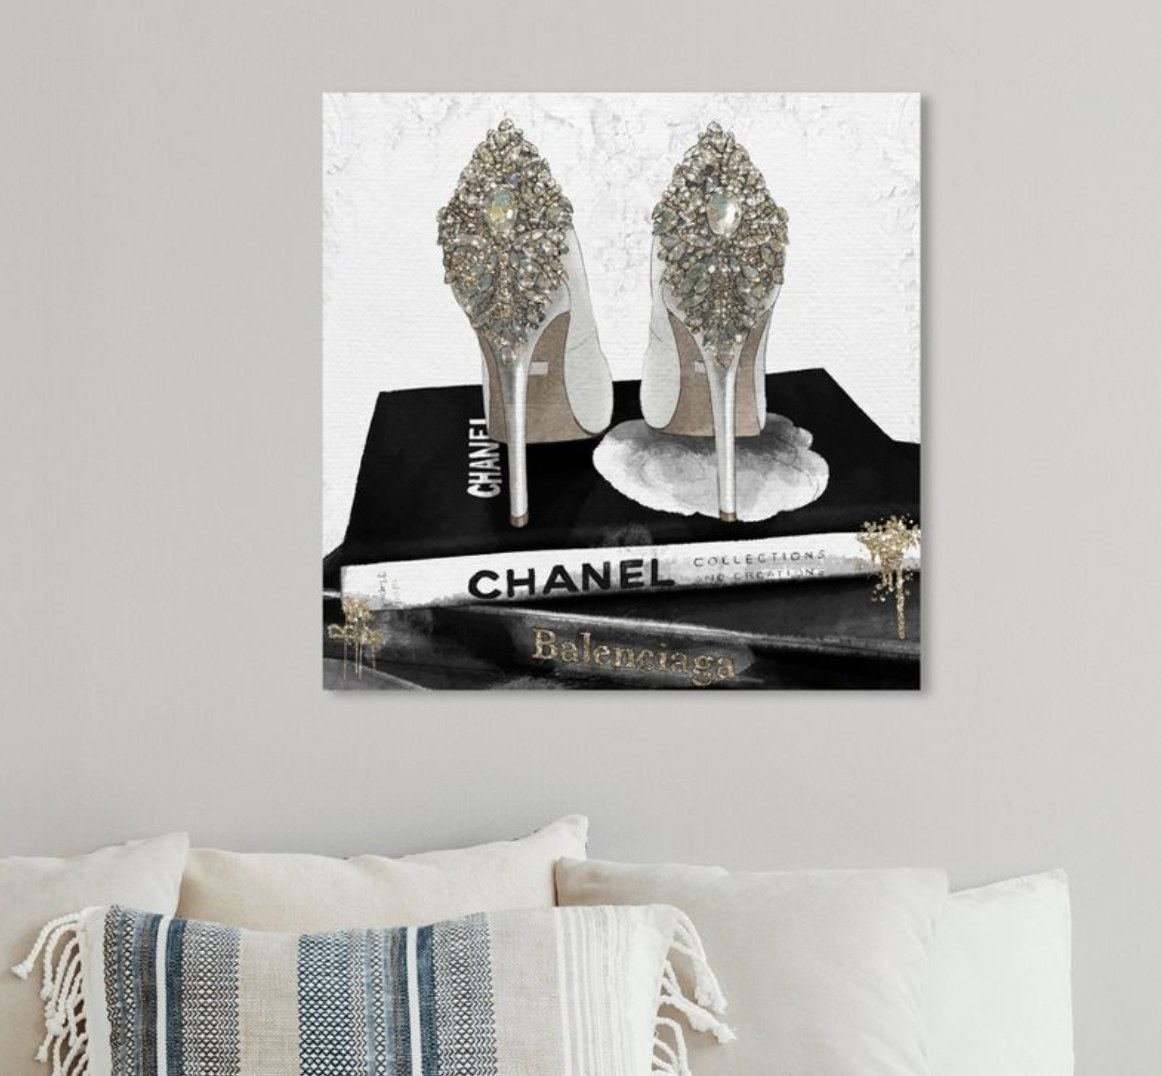 Canvas art with heels on top of Chanel and Balenciaga coffee books.